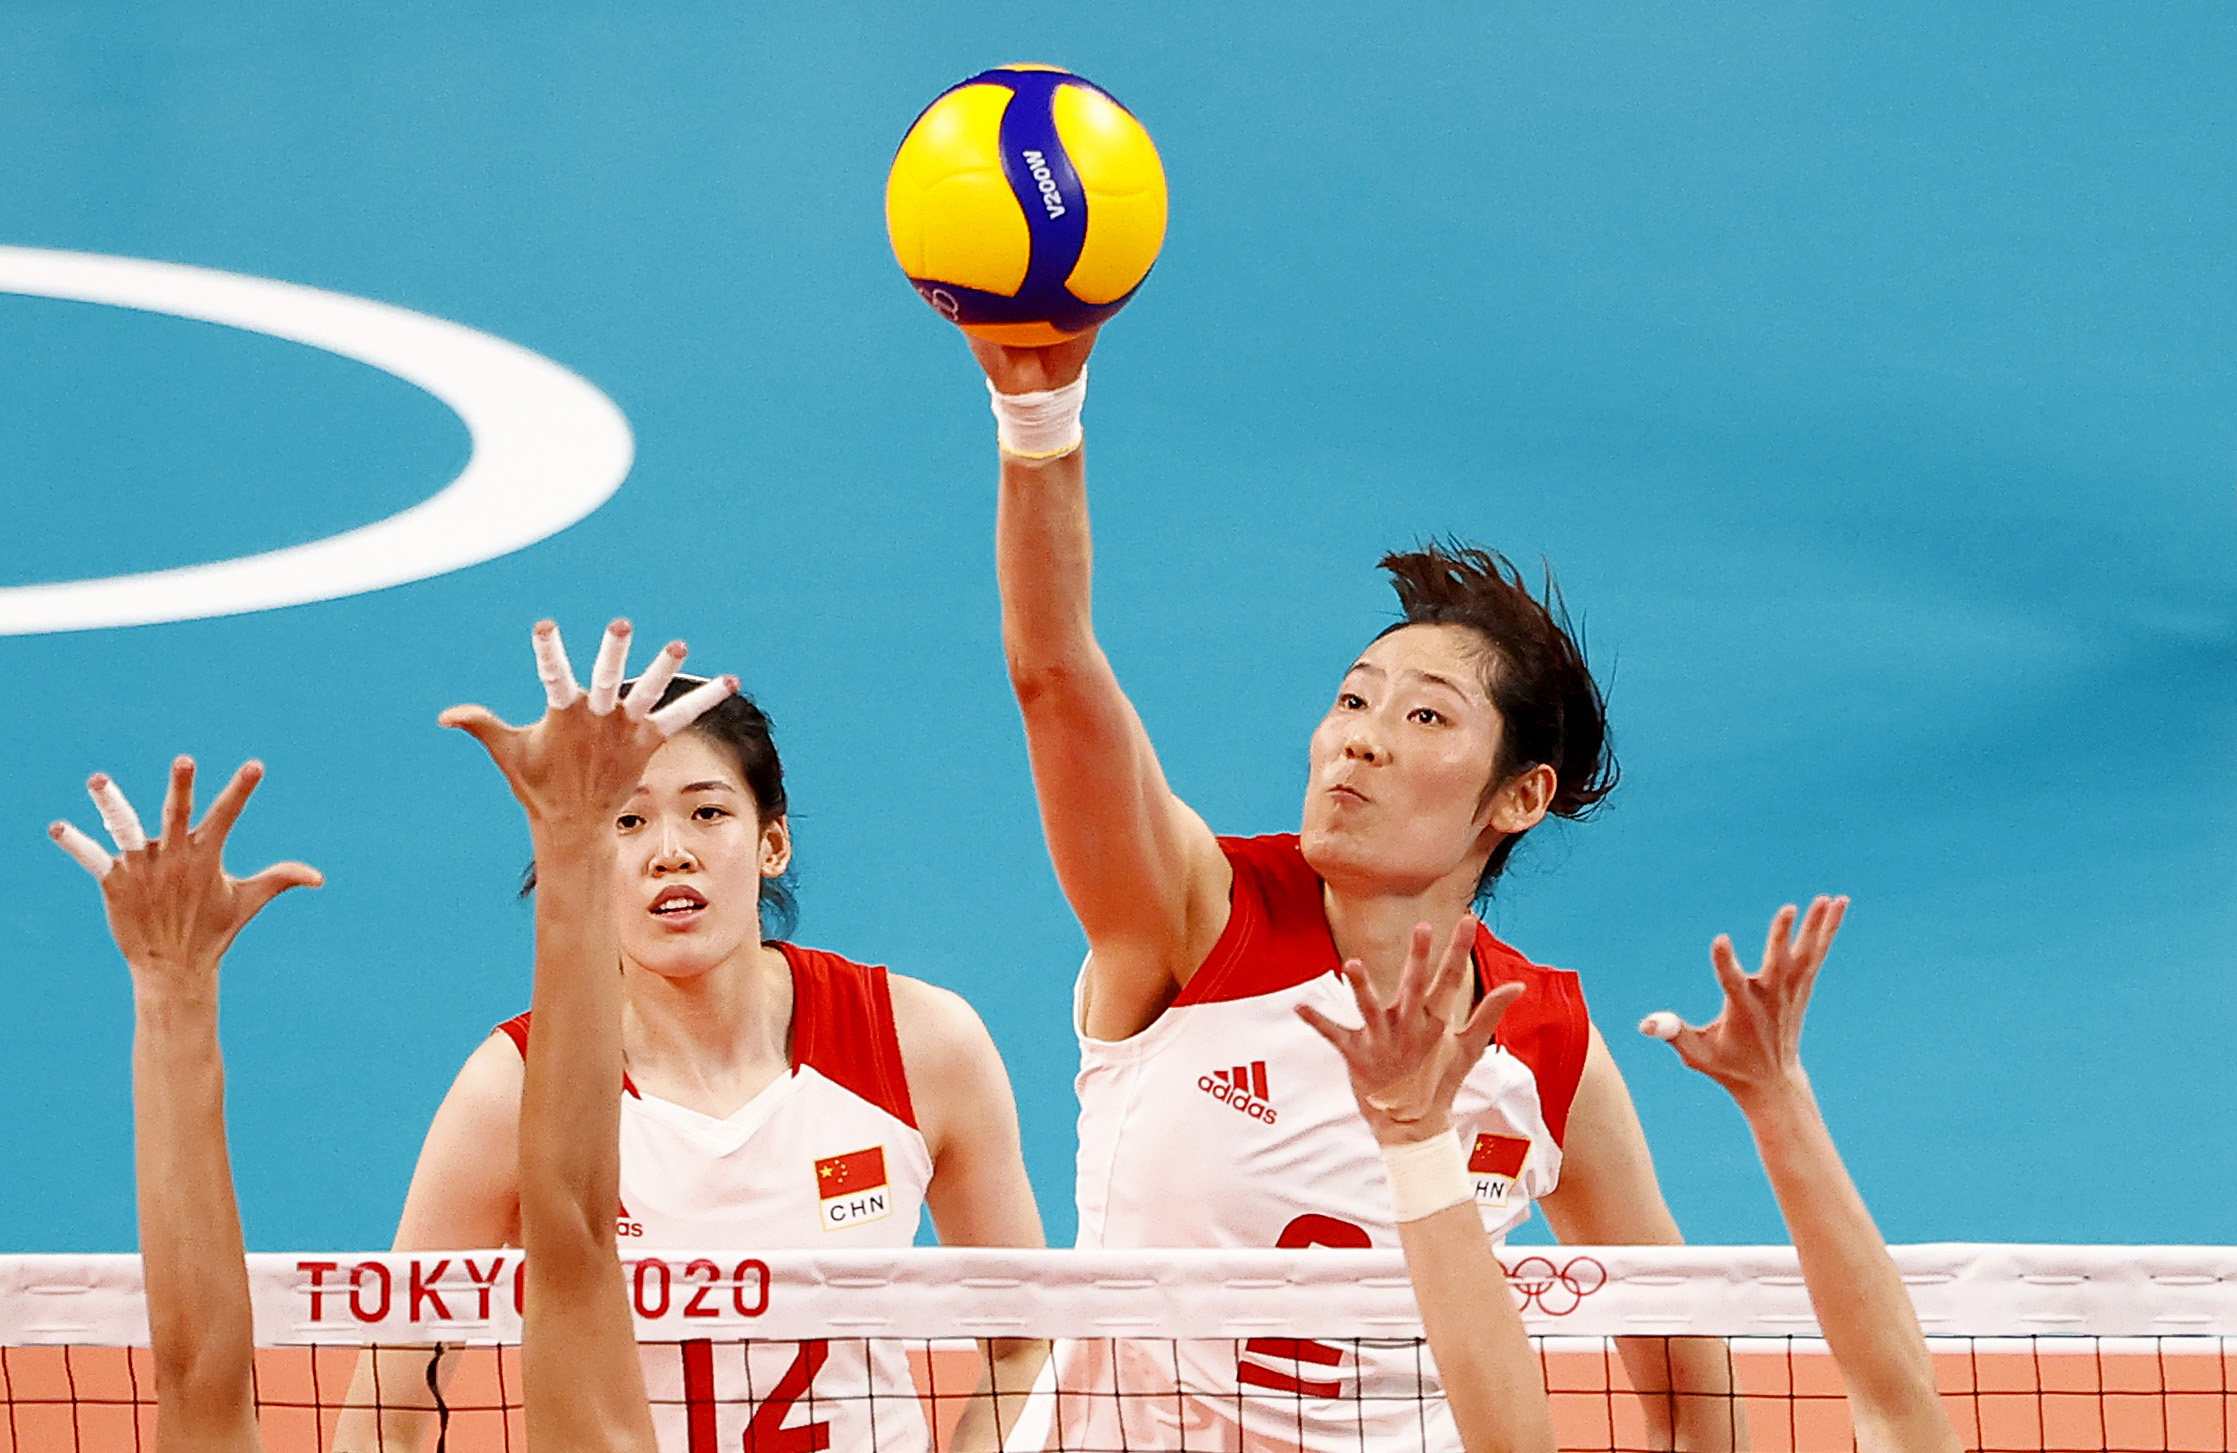 Zhu Ting will return to the China national team for the first time since undergoing wrist surgery after the Tokyo Olympics. Photo: Reuters